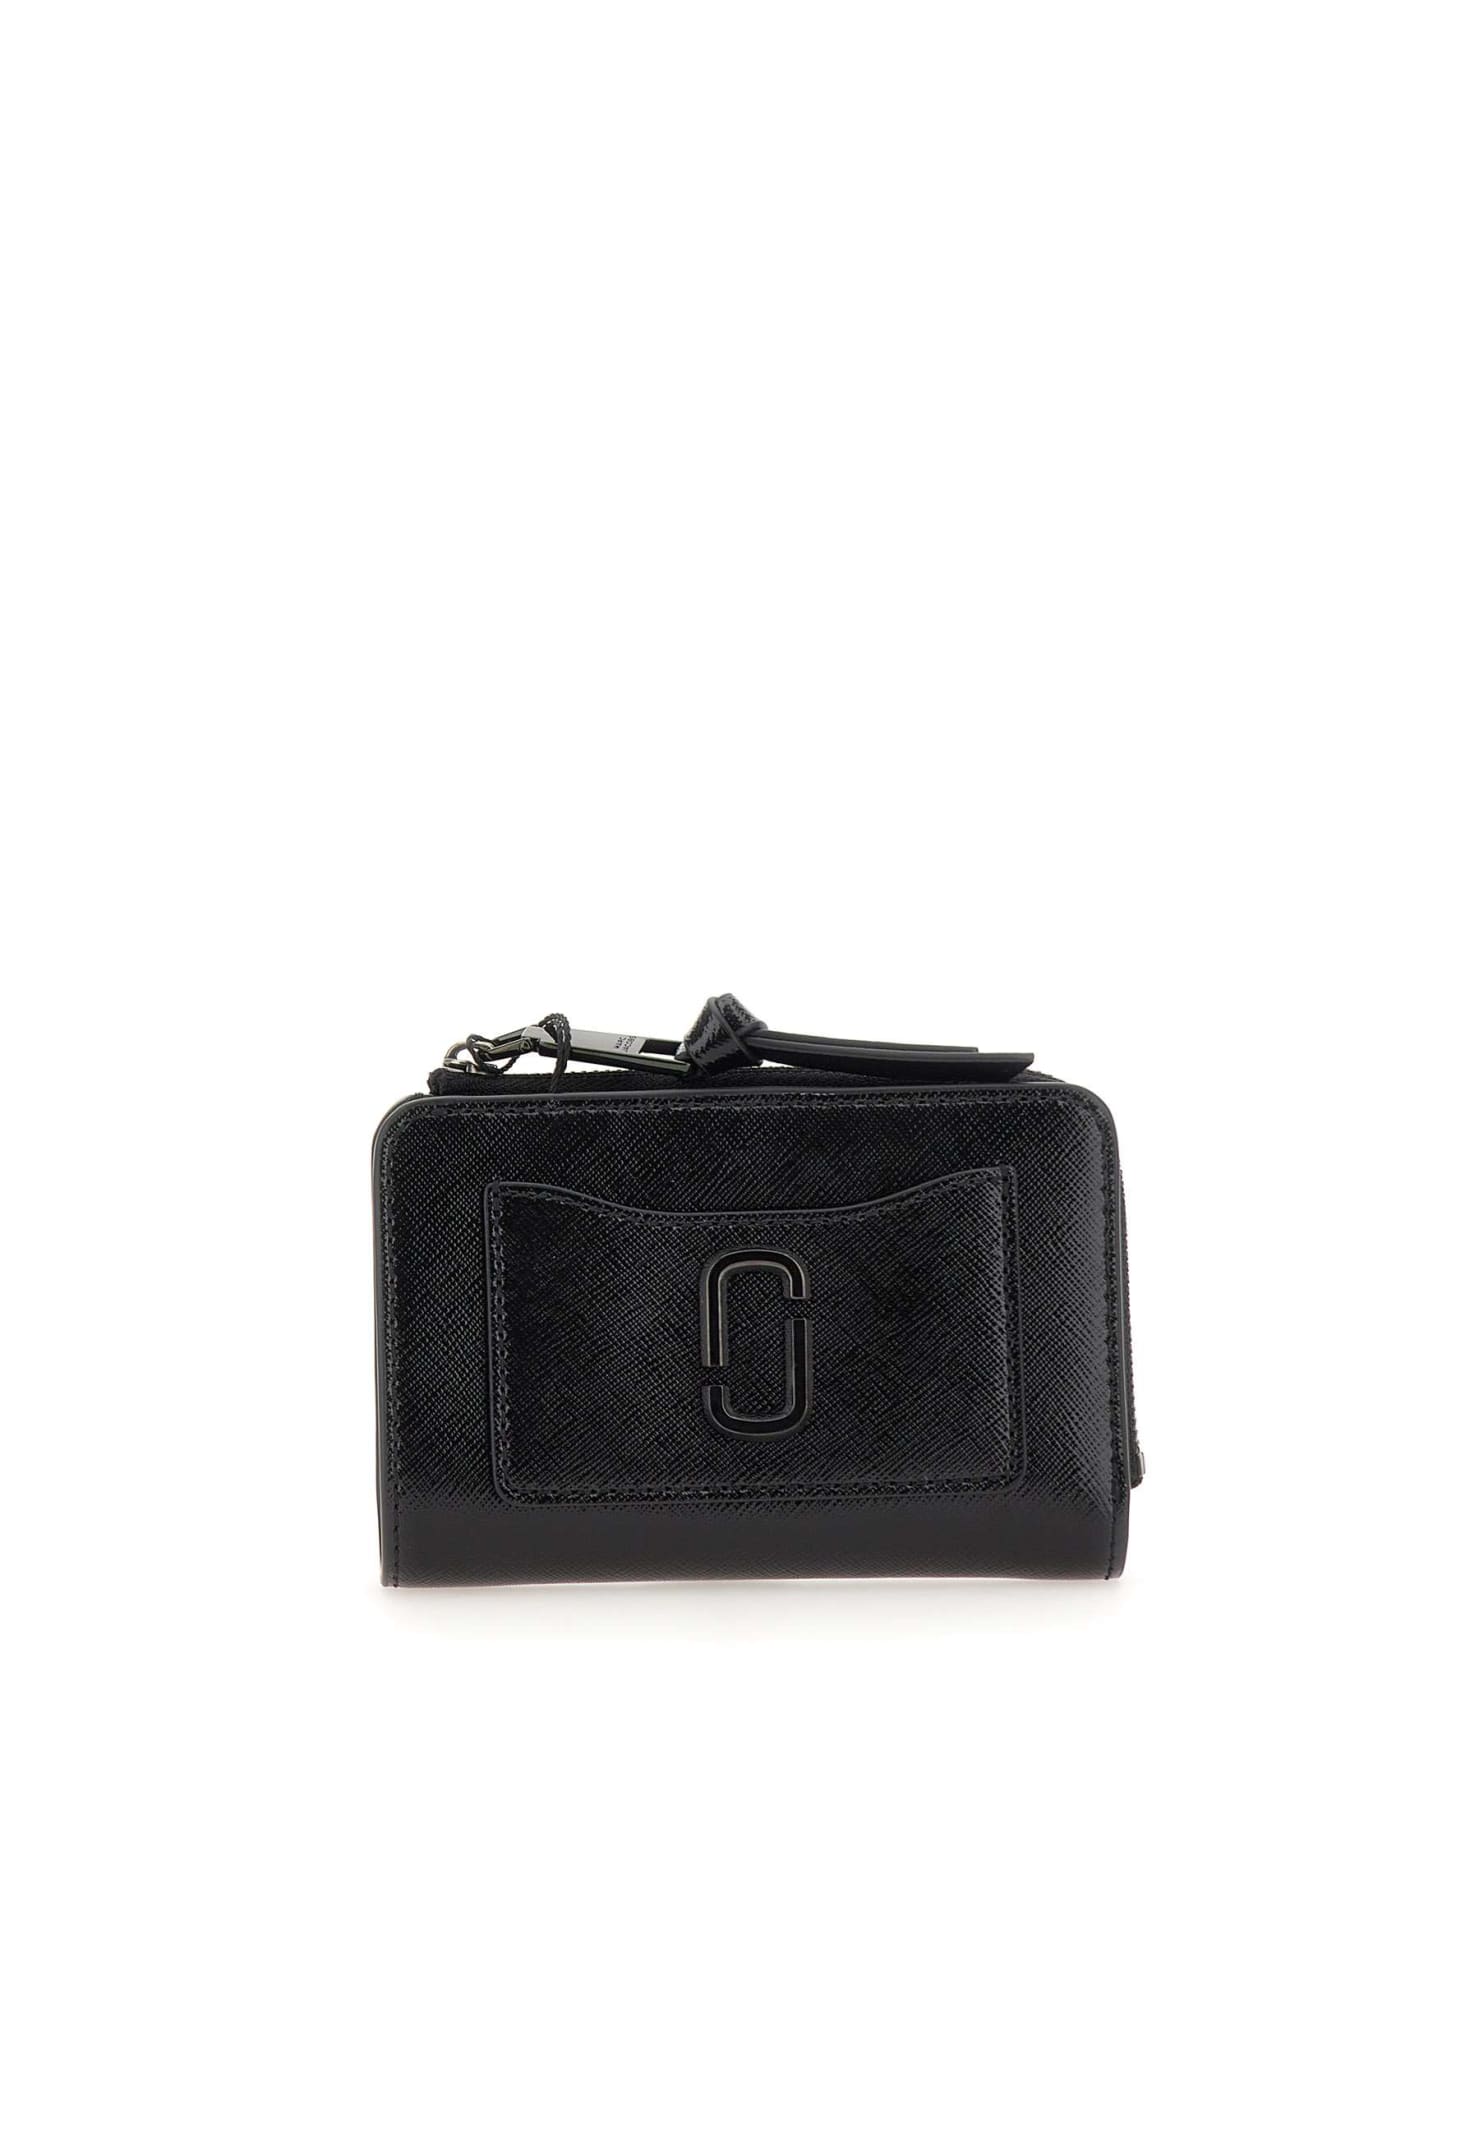 MARC JACOBS THE SIM BIFOLD LEATHER WALLET